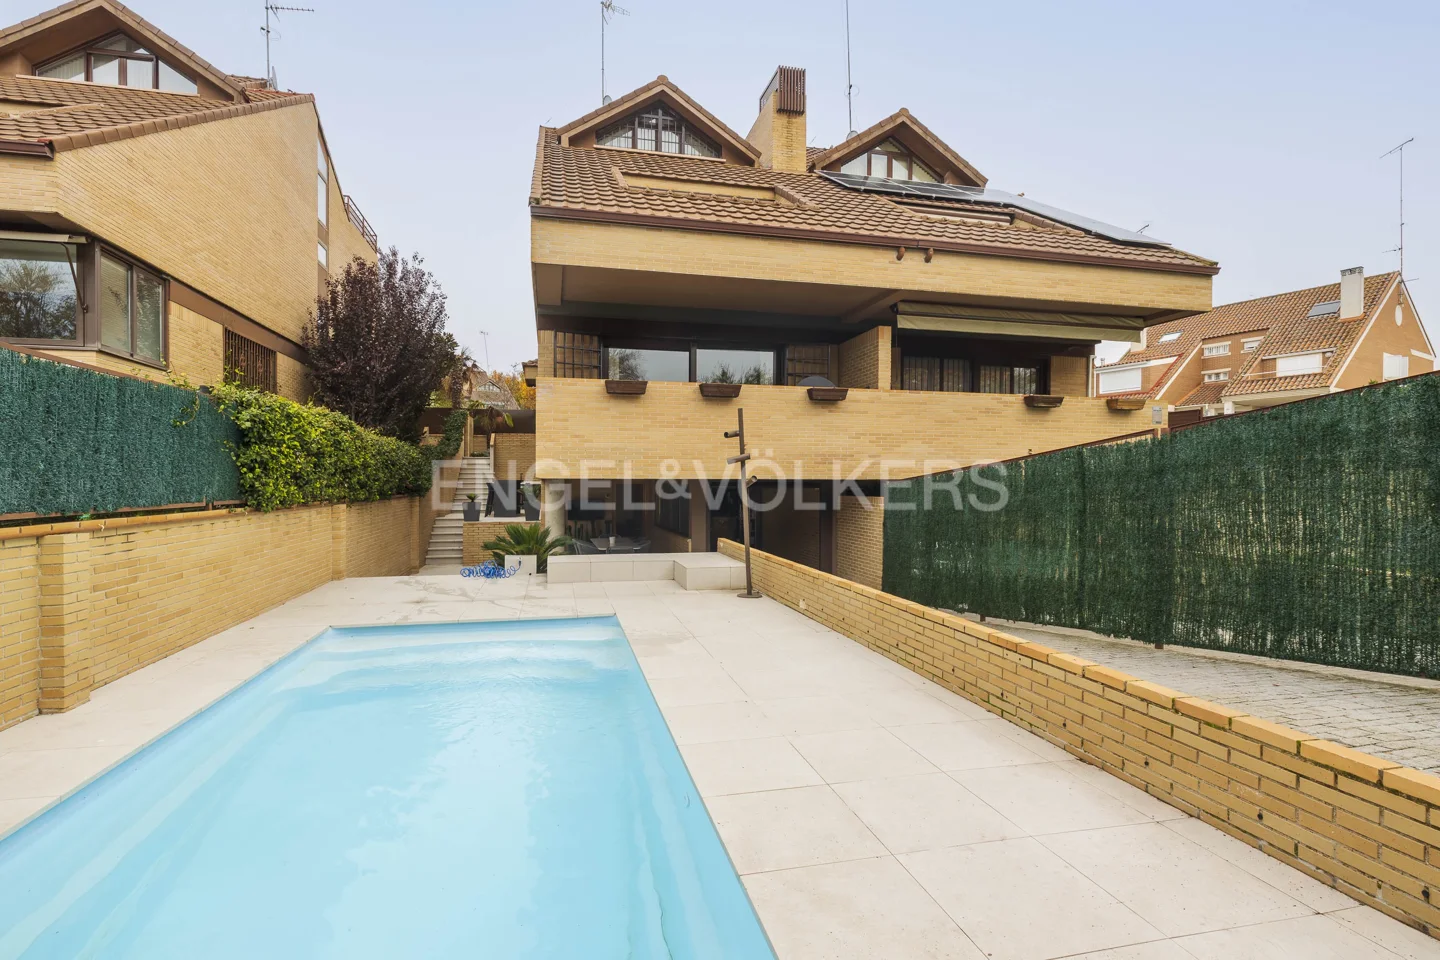 Unfurnished house with swimming pool